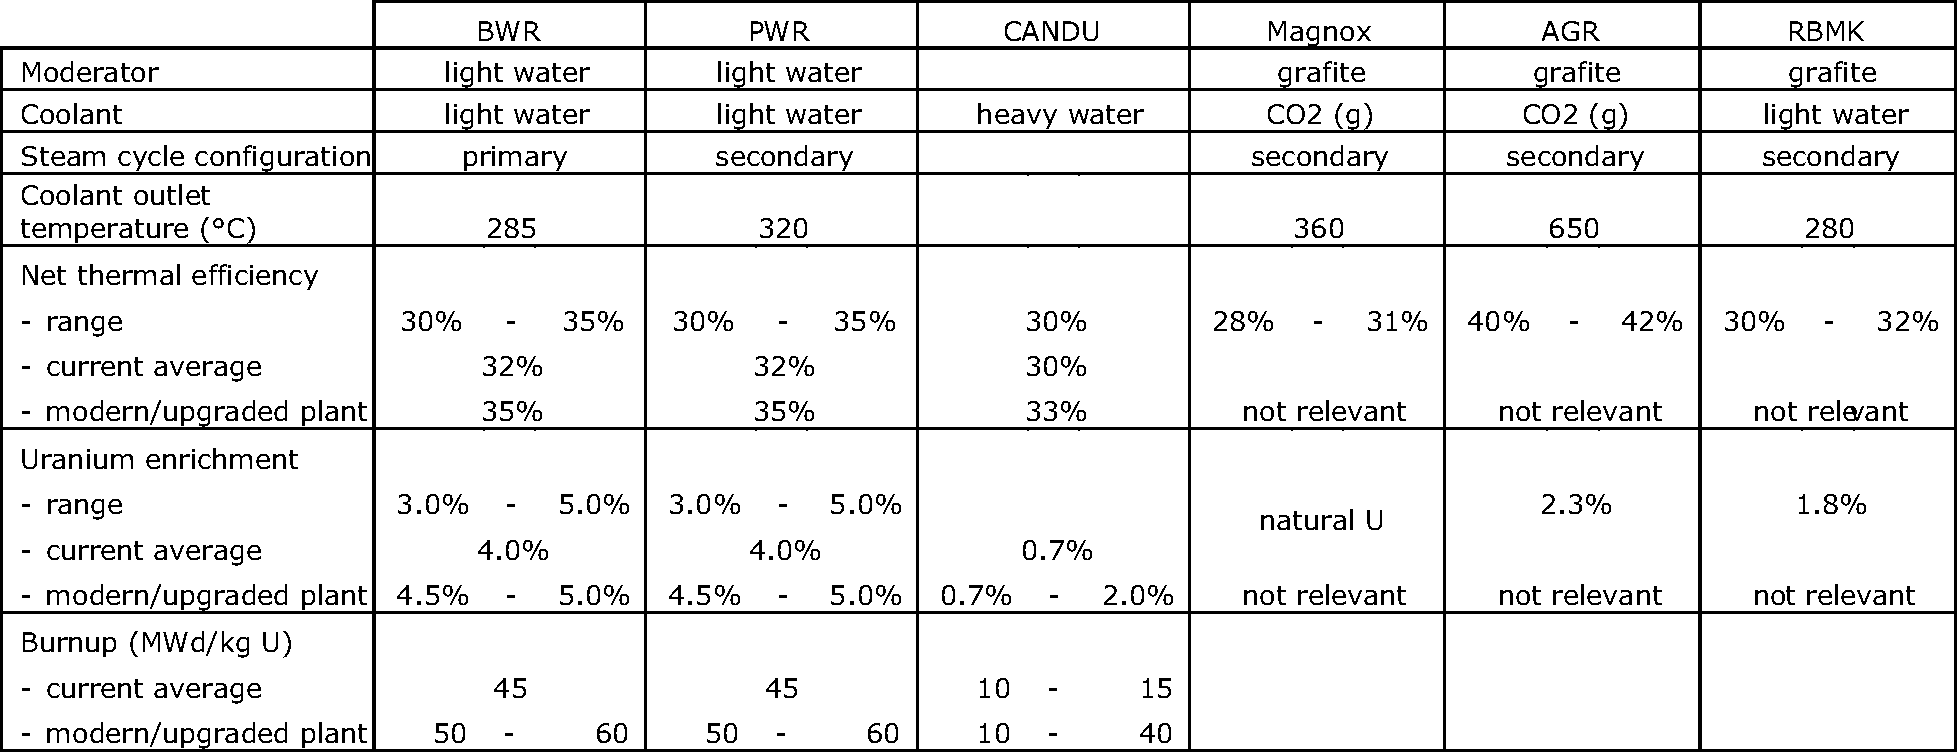 Indicative specifications for different reactor types